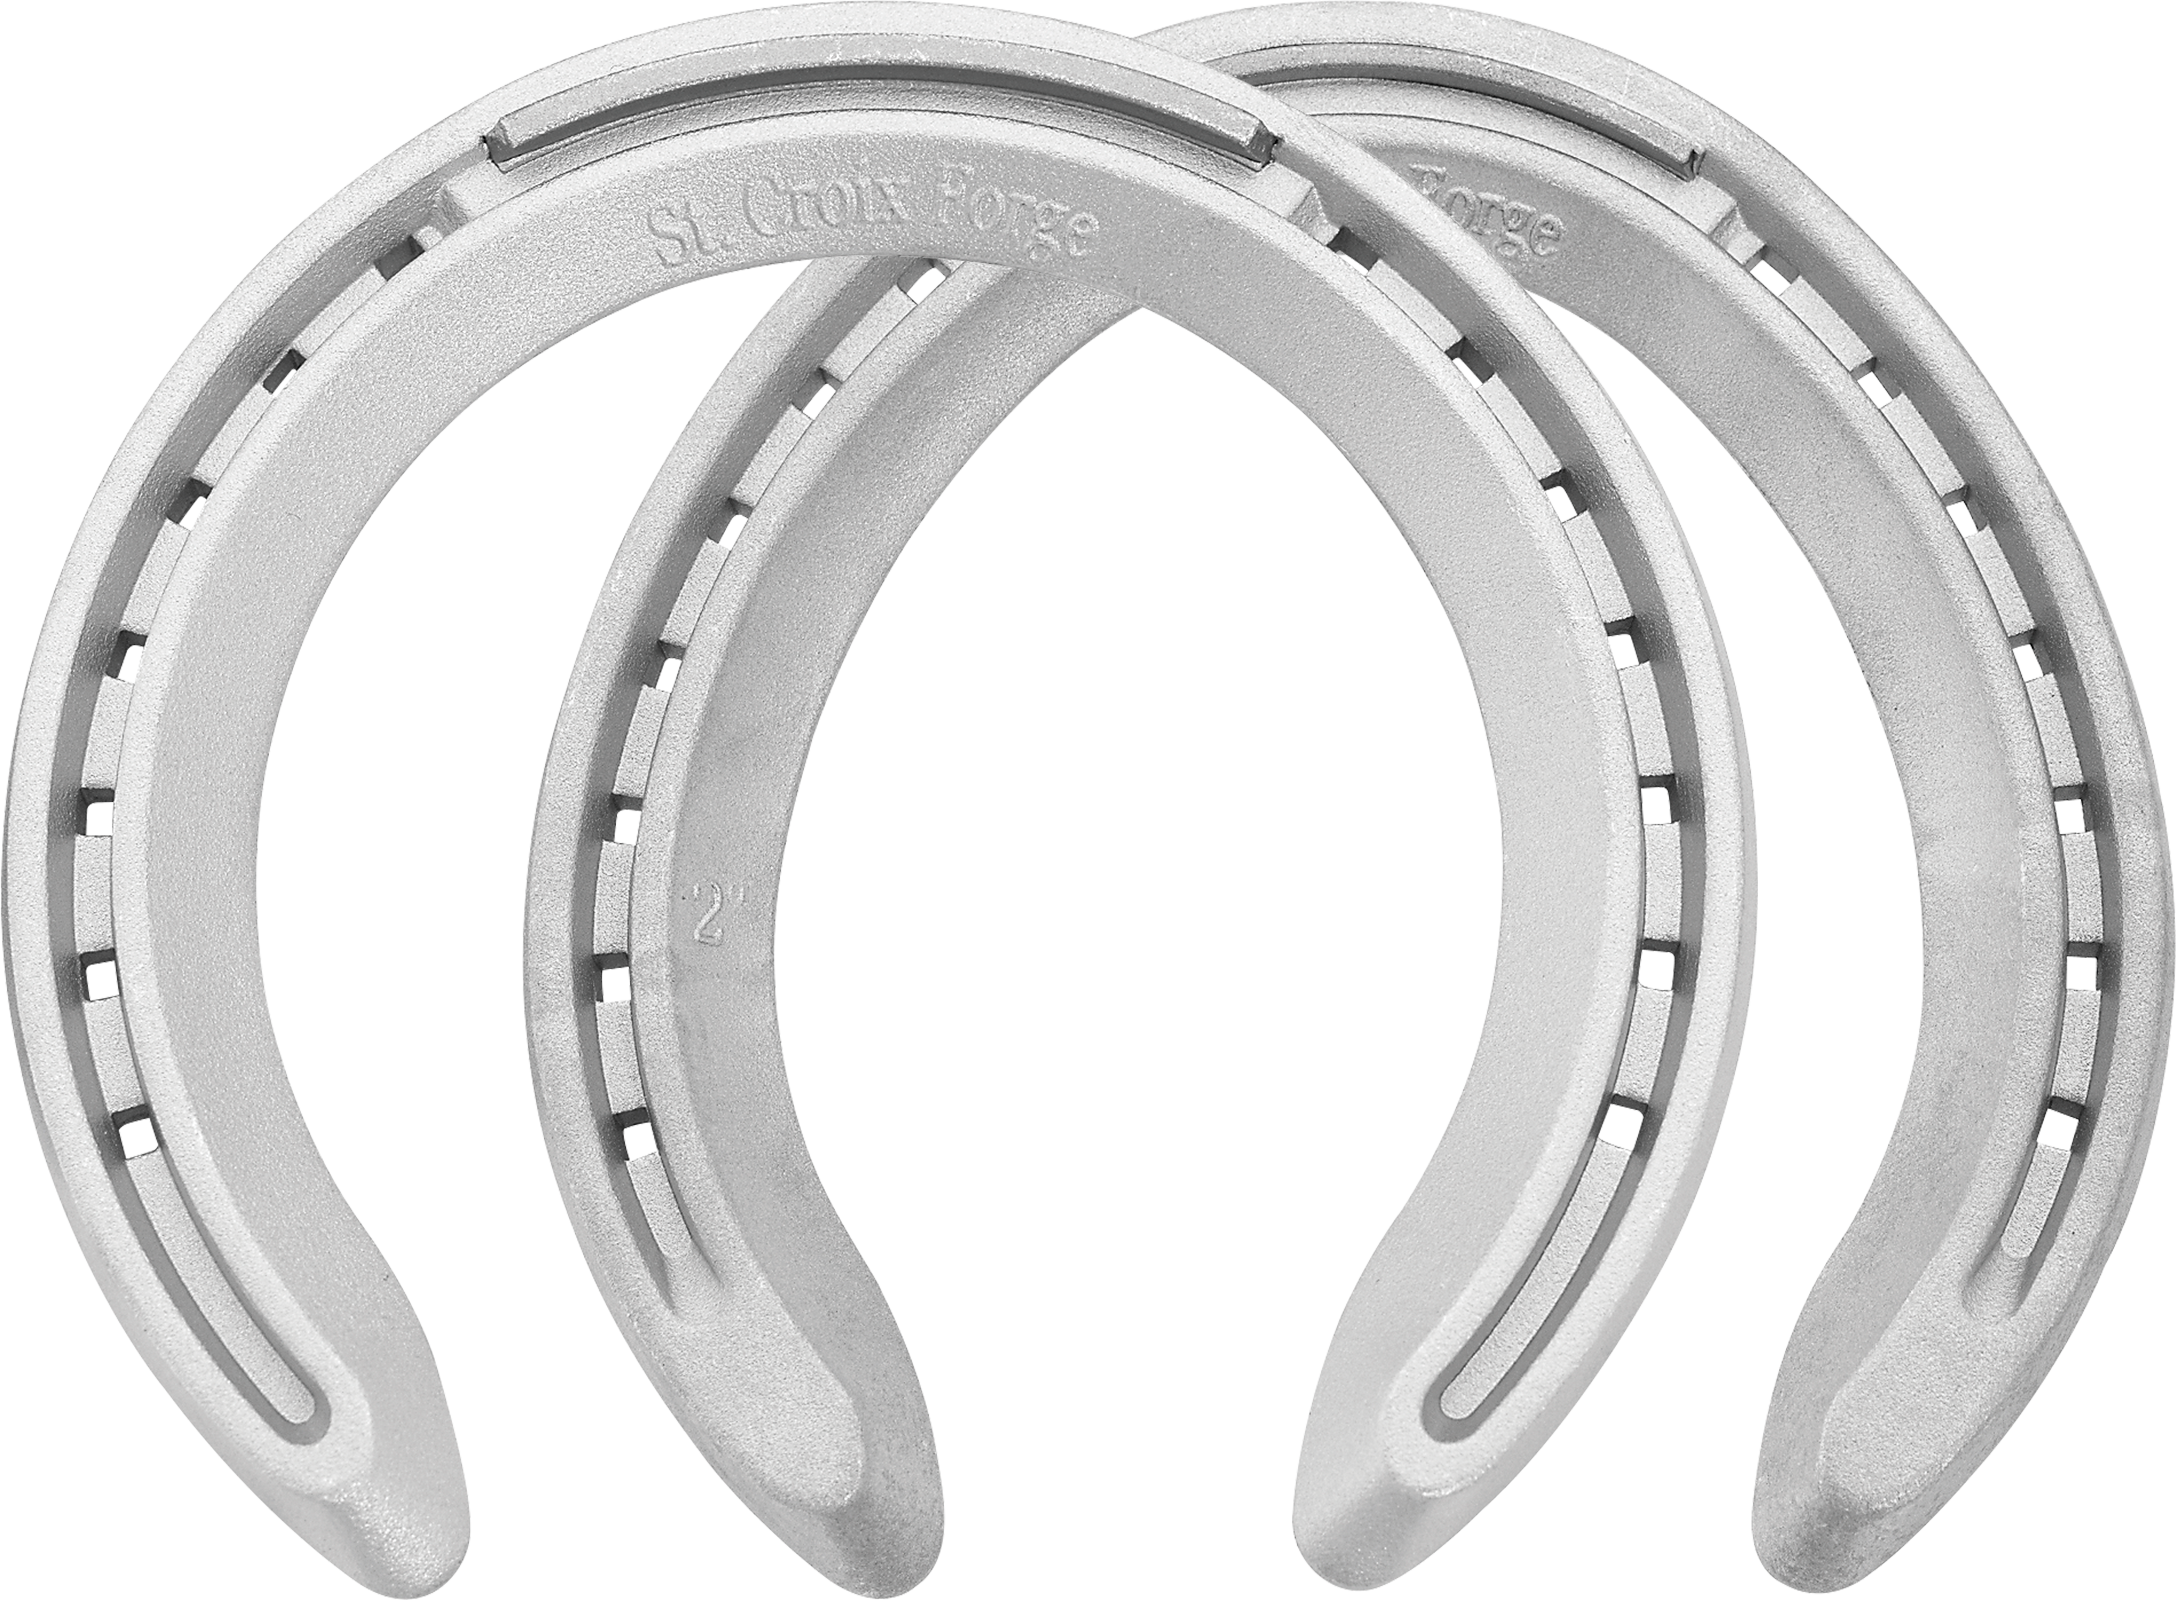 St. Croix Concorde XLT horseshoes, front and hind, bottom view